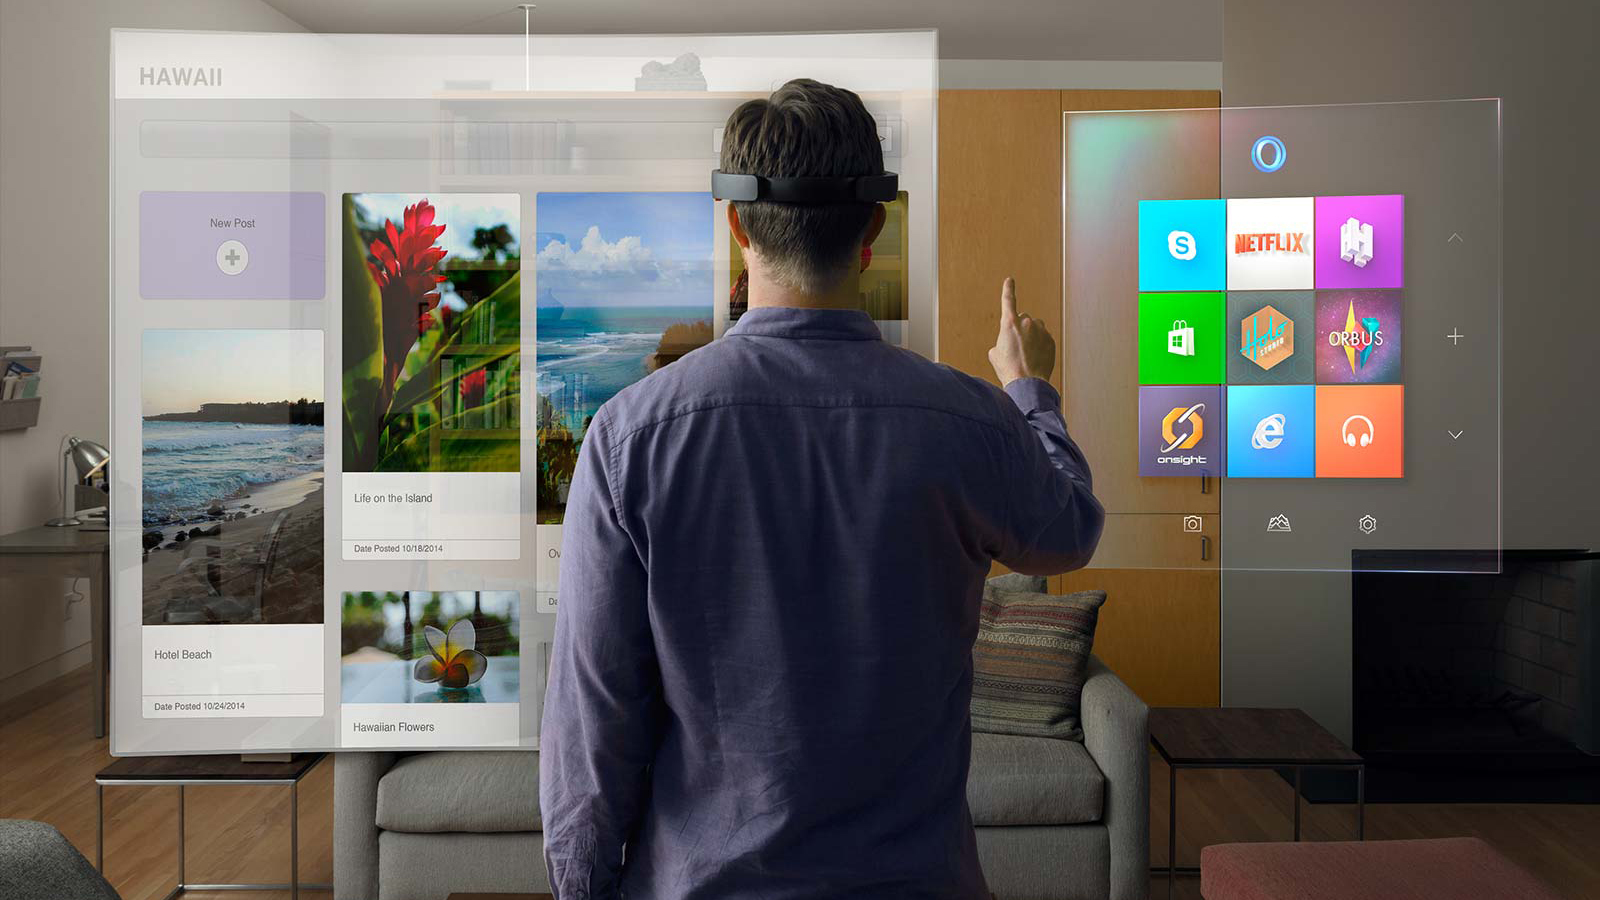 Hololens in use